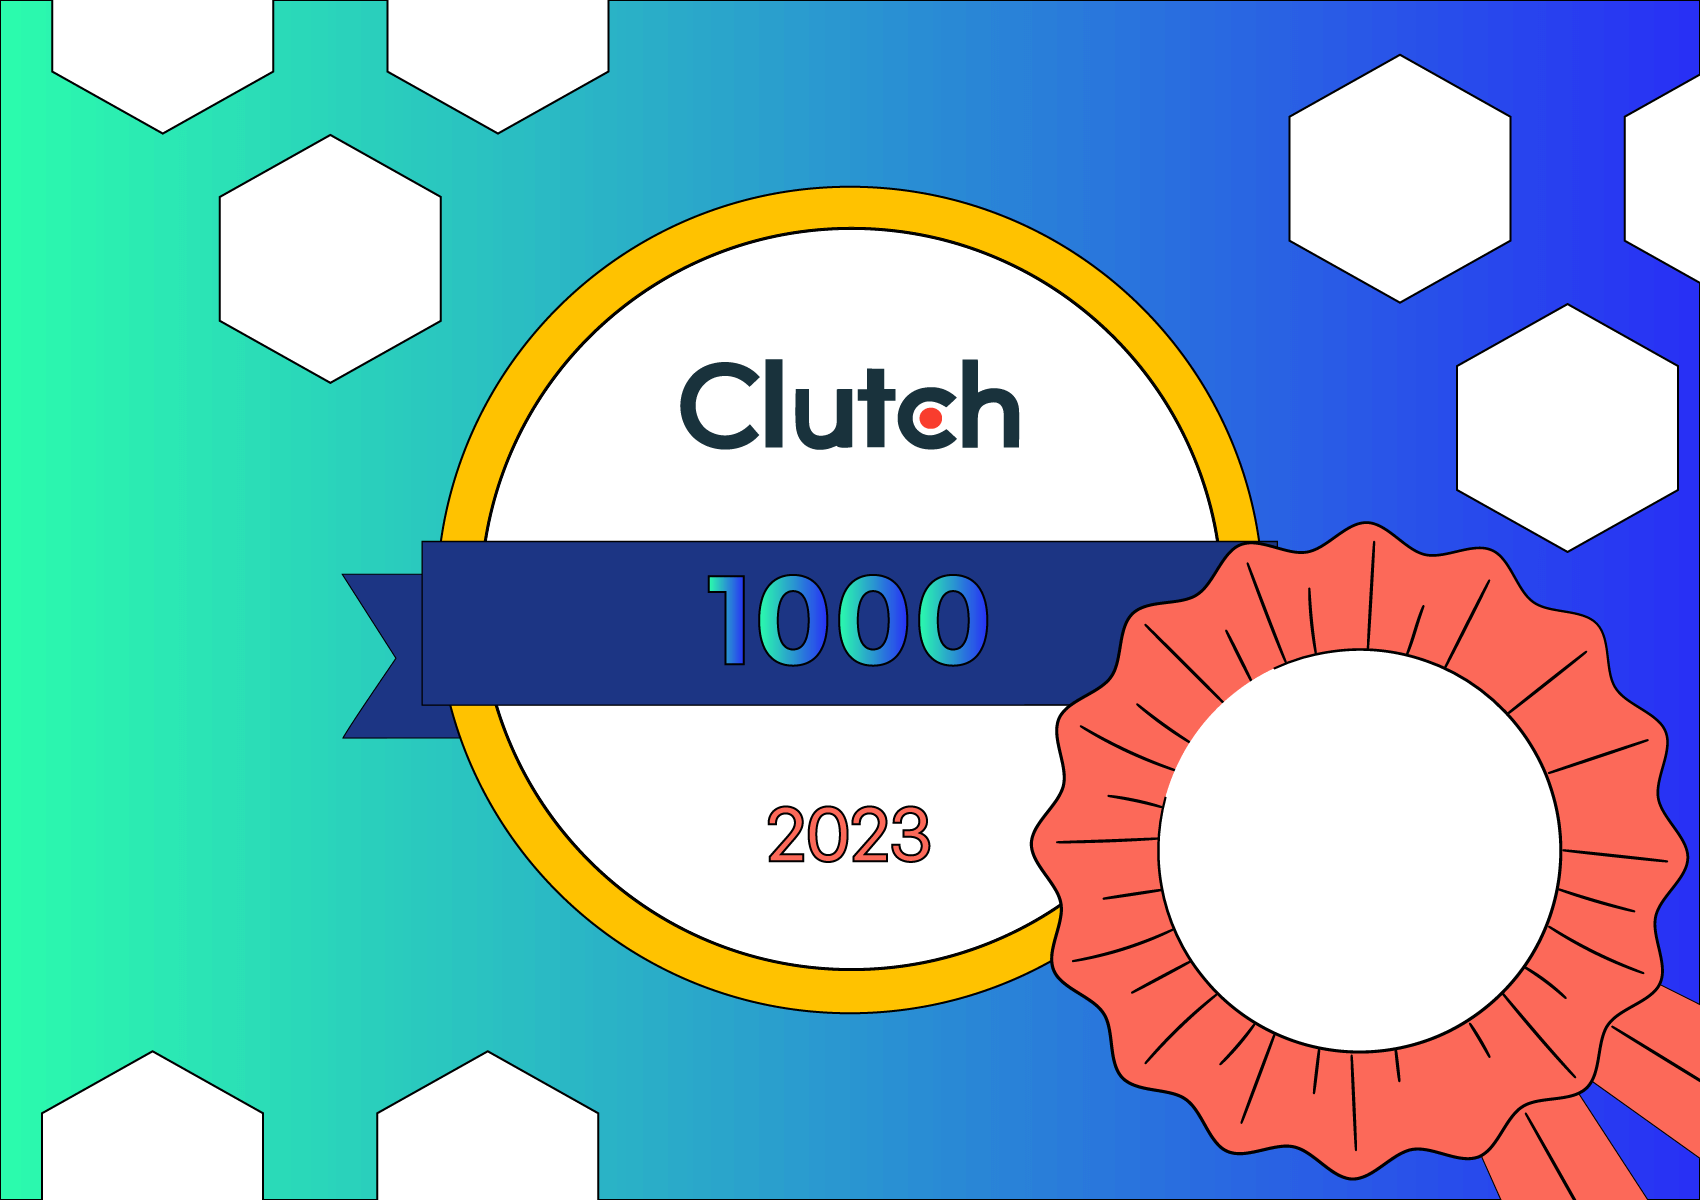 Onix-Systems Recognized on the Clutch 1000 List for 2023